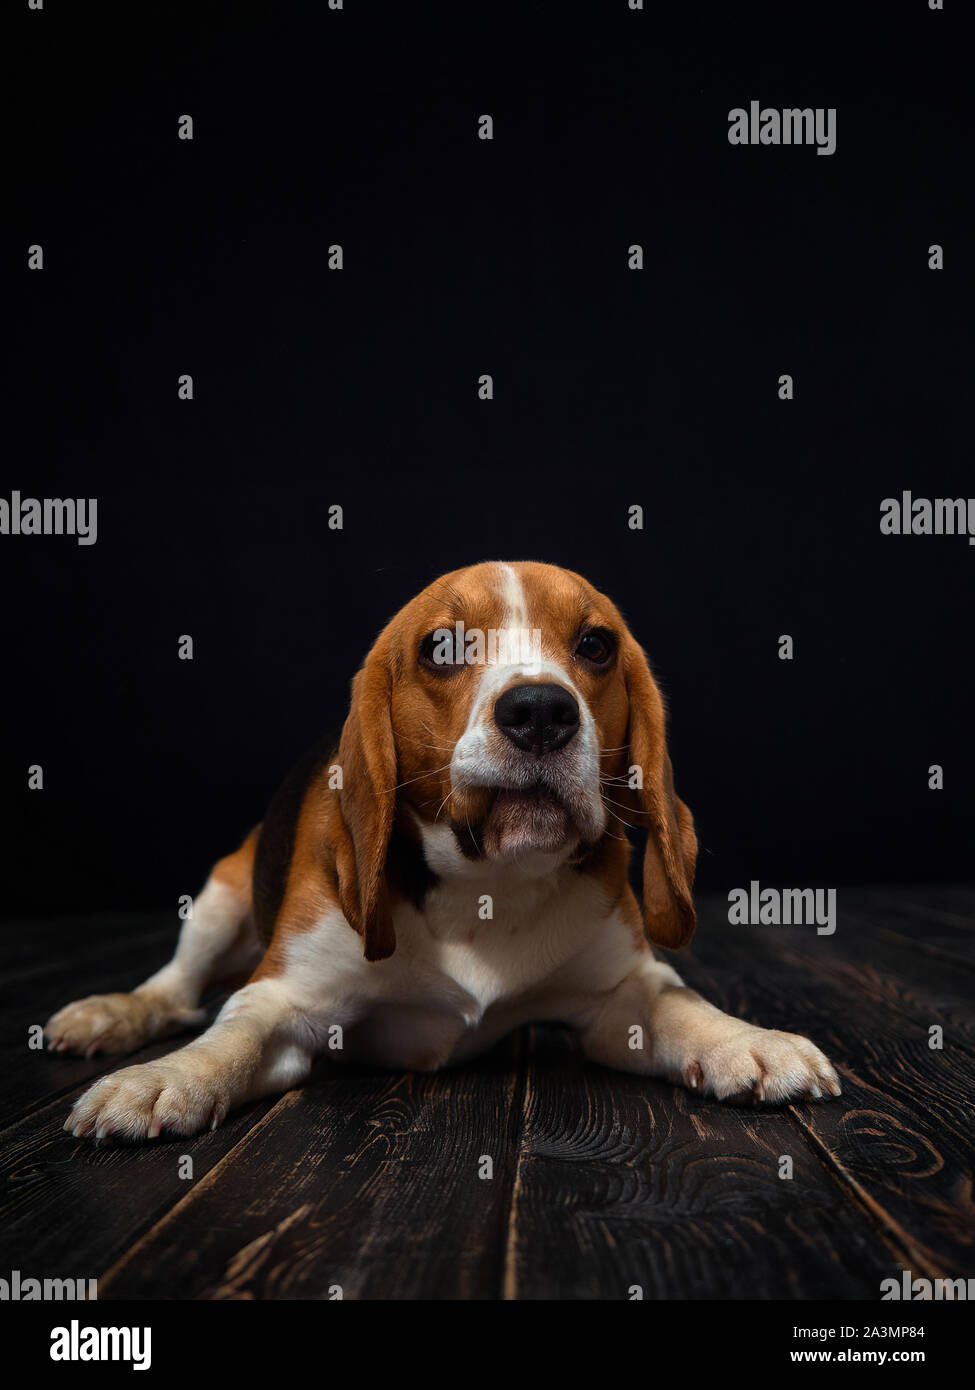 Beagle dog portrait shot in photo studio on black background and wooden floor.The dog made a grimace. Stock Photo